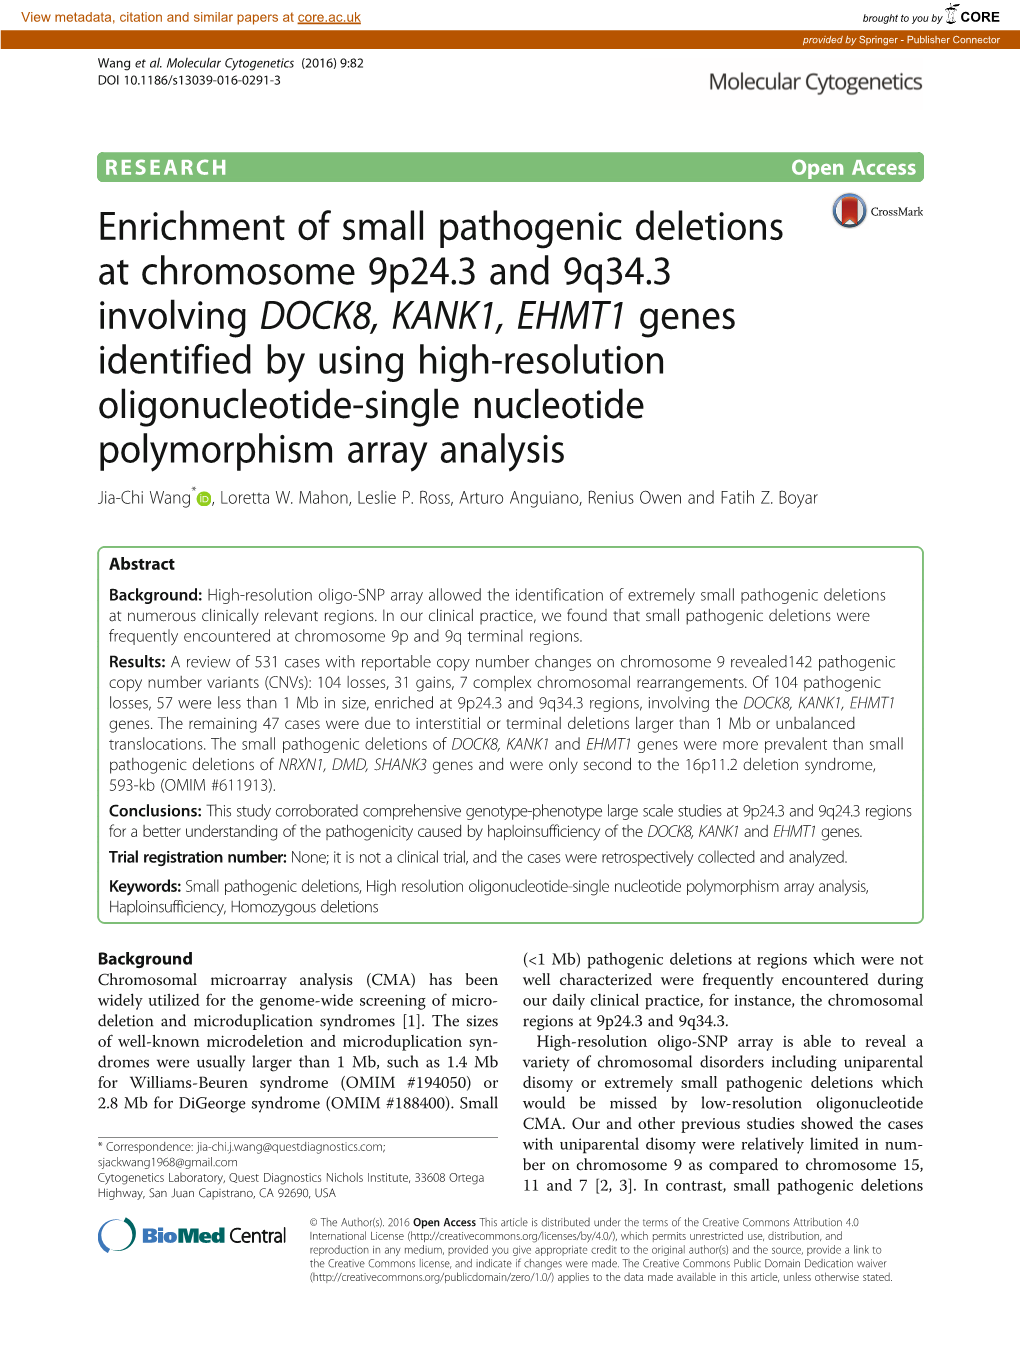 Enrichment of Small Pathogenic Deletions at Chromosome 9P24.3